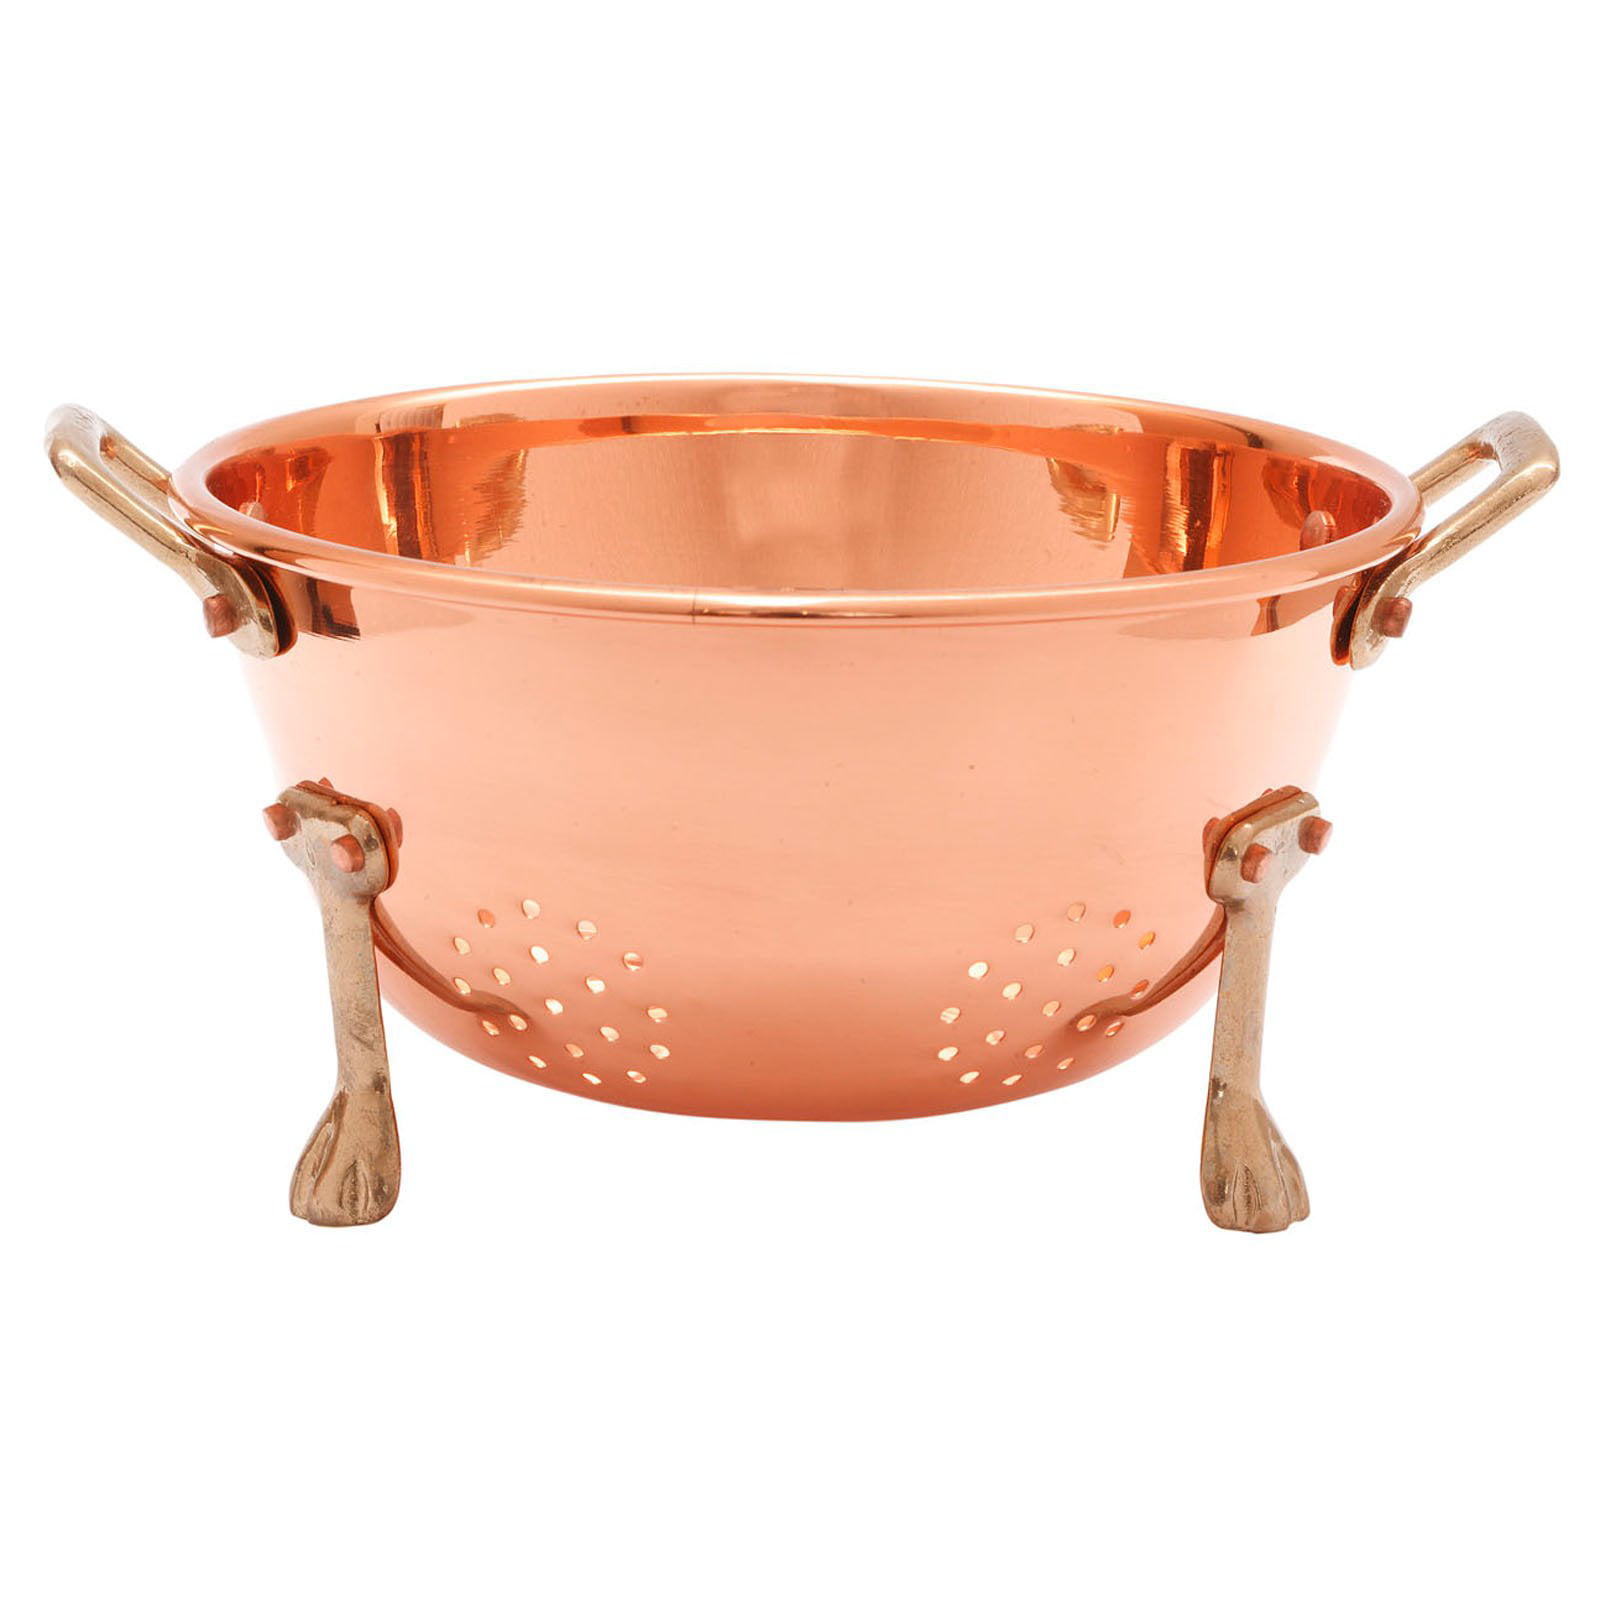 Copper plated stainless steel berry colander 